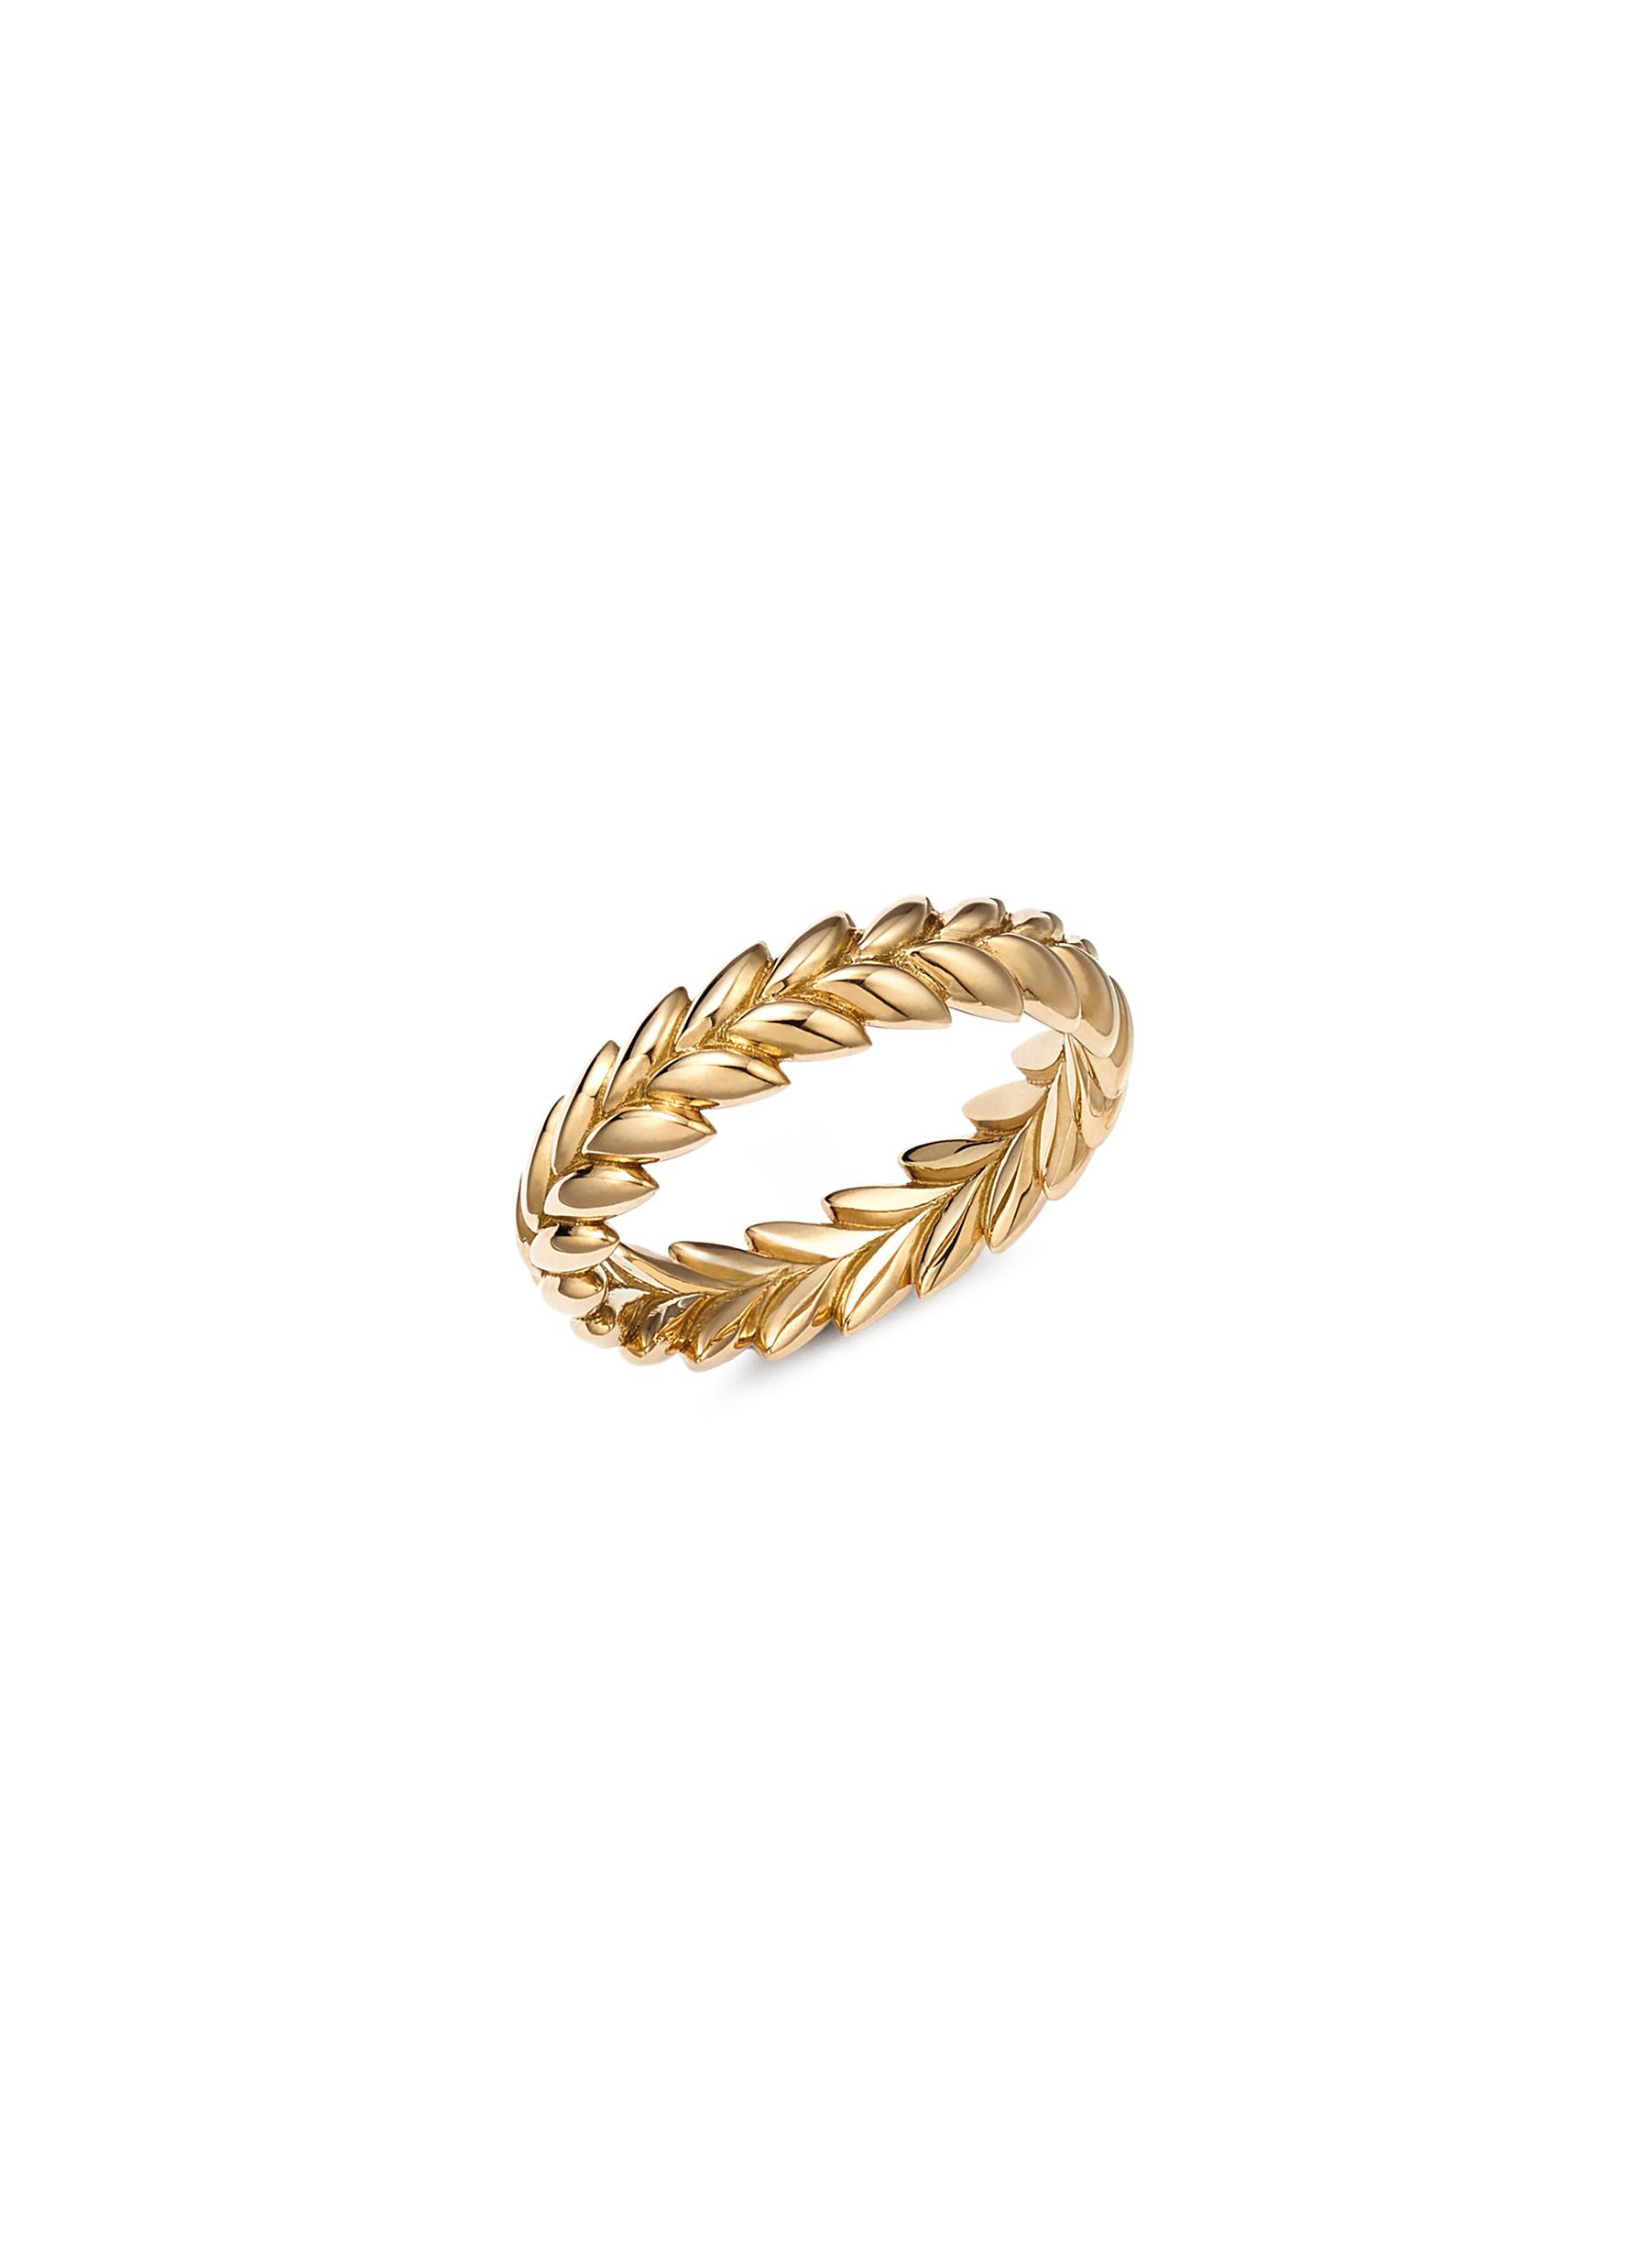 FUTURA ‘ETHEREAL' 18K FAIRMINED ECOLOGICAL GOLD RING